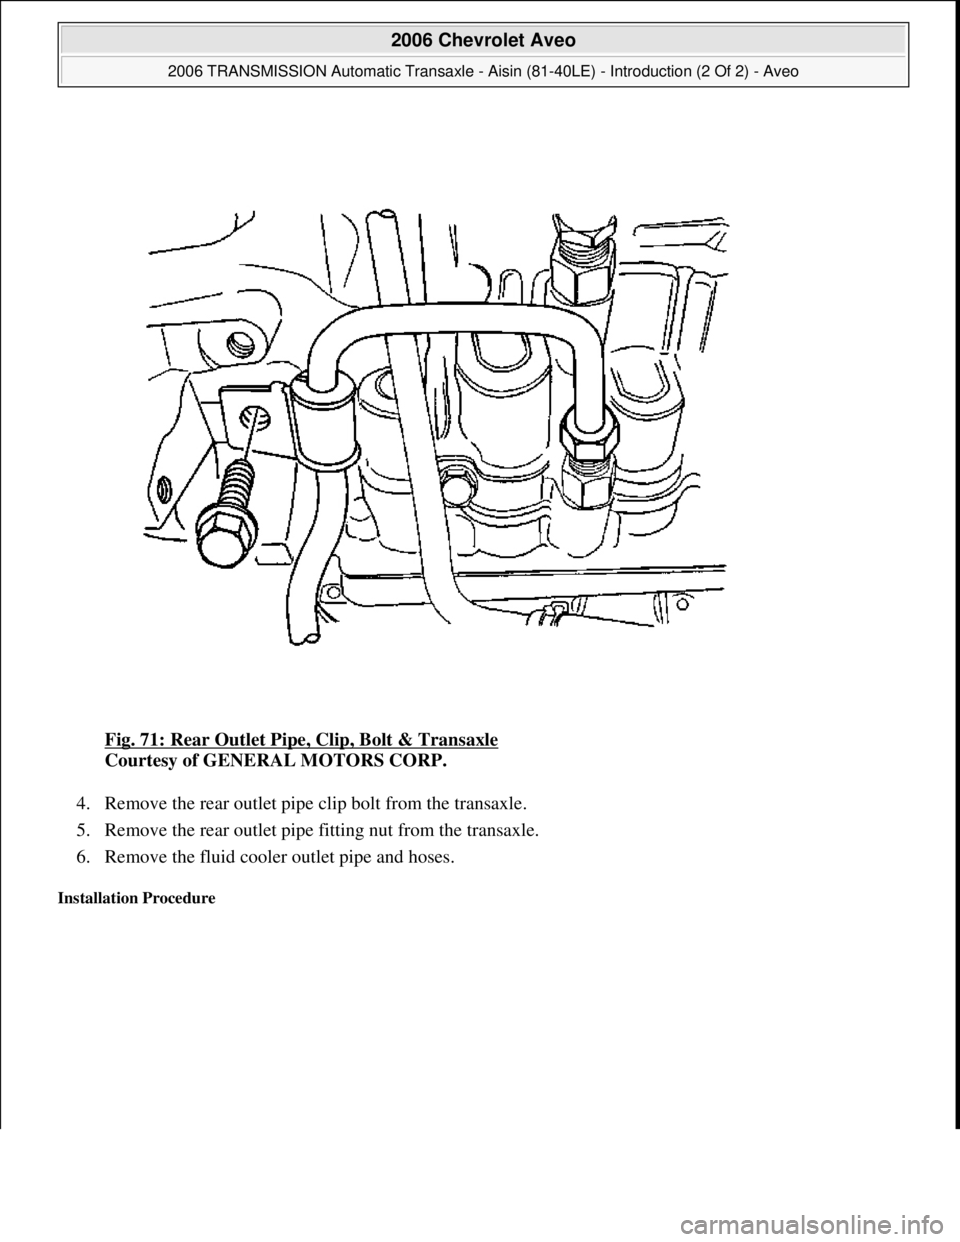 CHEVROLET AVEO 2002  Service User Guide Fig. 71: Rear Outlet Pipe, Clip, Bolt & Transaxle 
Courtesy of GENERAL MOTORS CORP. 
4. Remove the rear outlet pipe clip bolt from the transaxle.  
5. Remove the rear outlet pipe fitting nut from the 